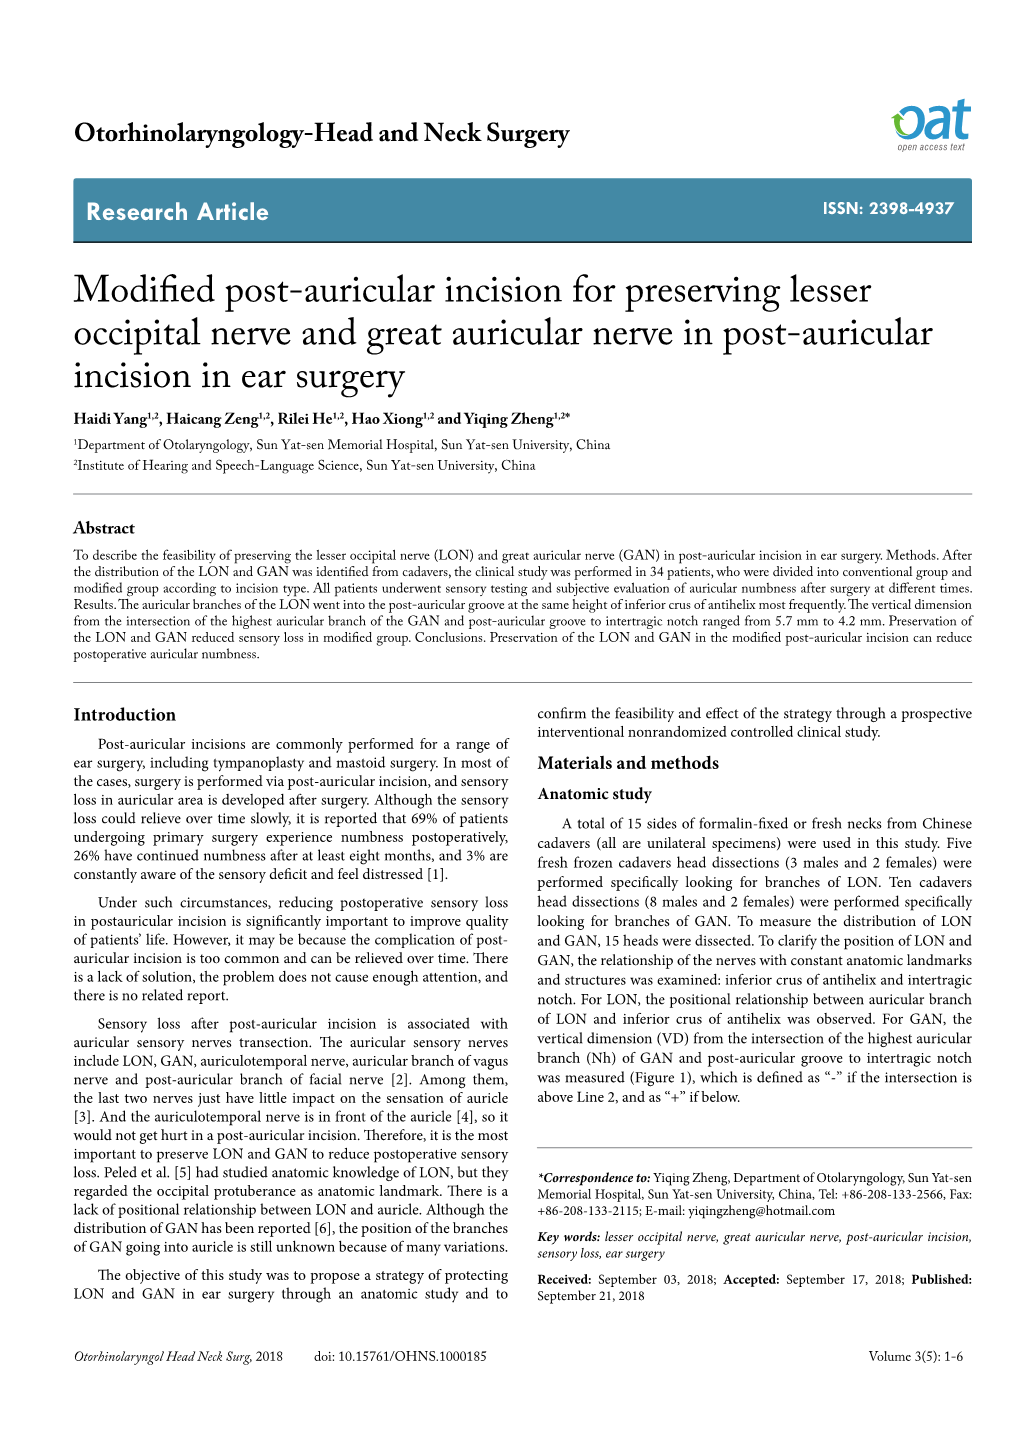 Modified Post-Auricular Incision for Preserving Lesser Occipital Nerve